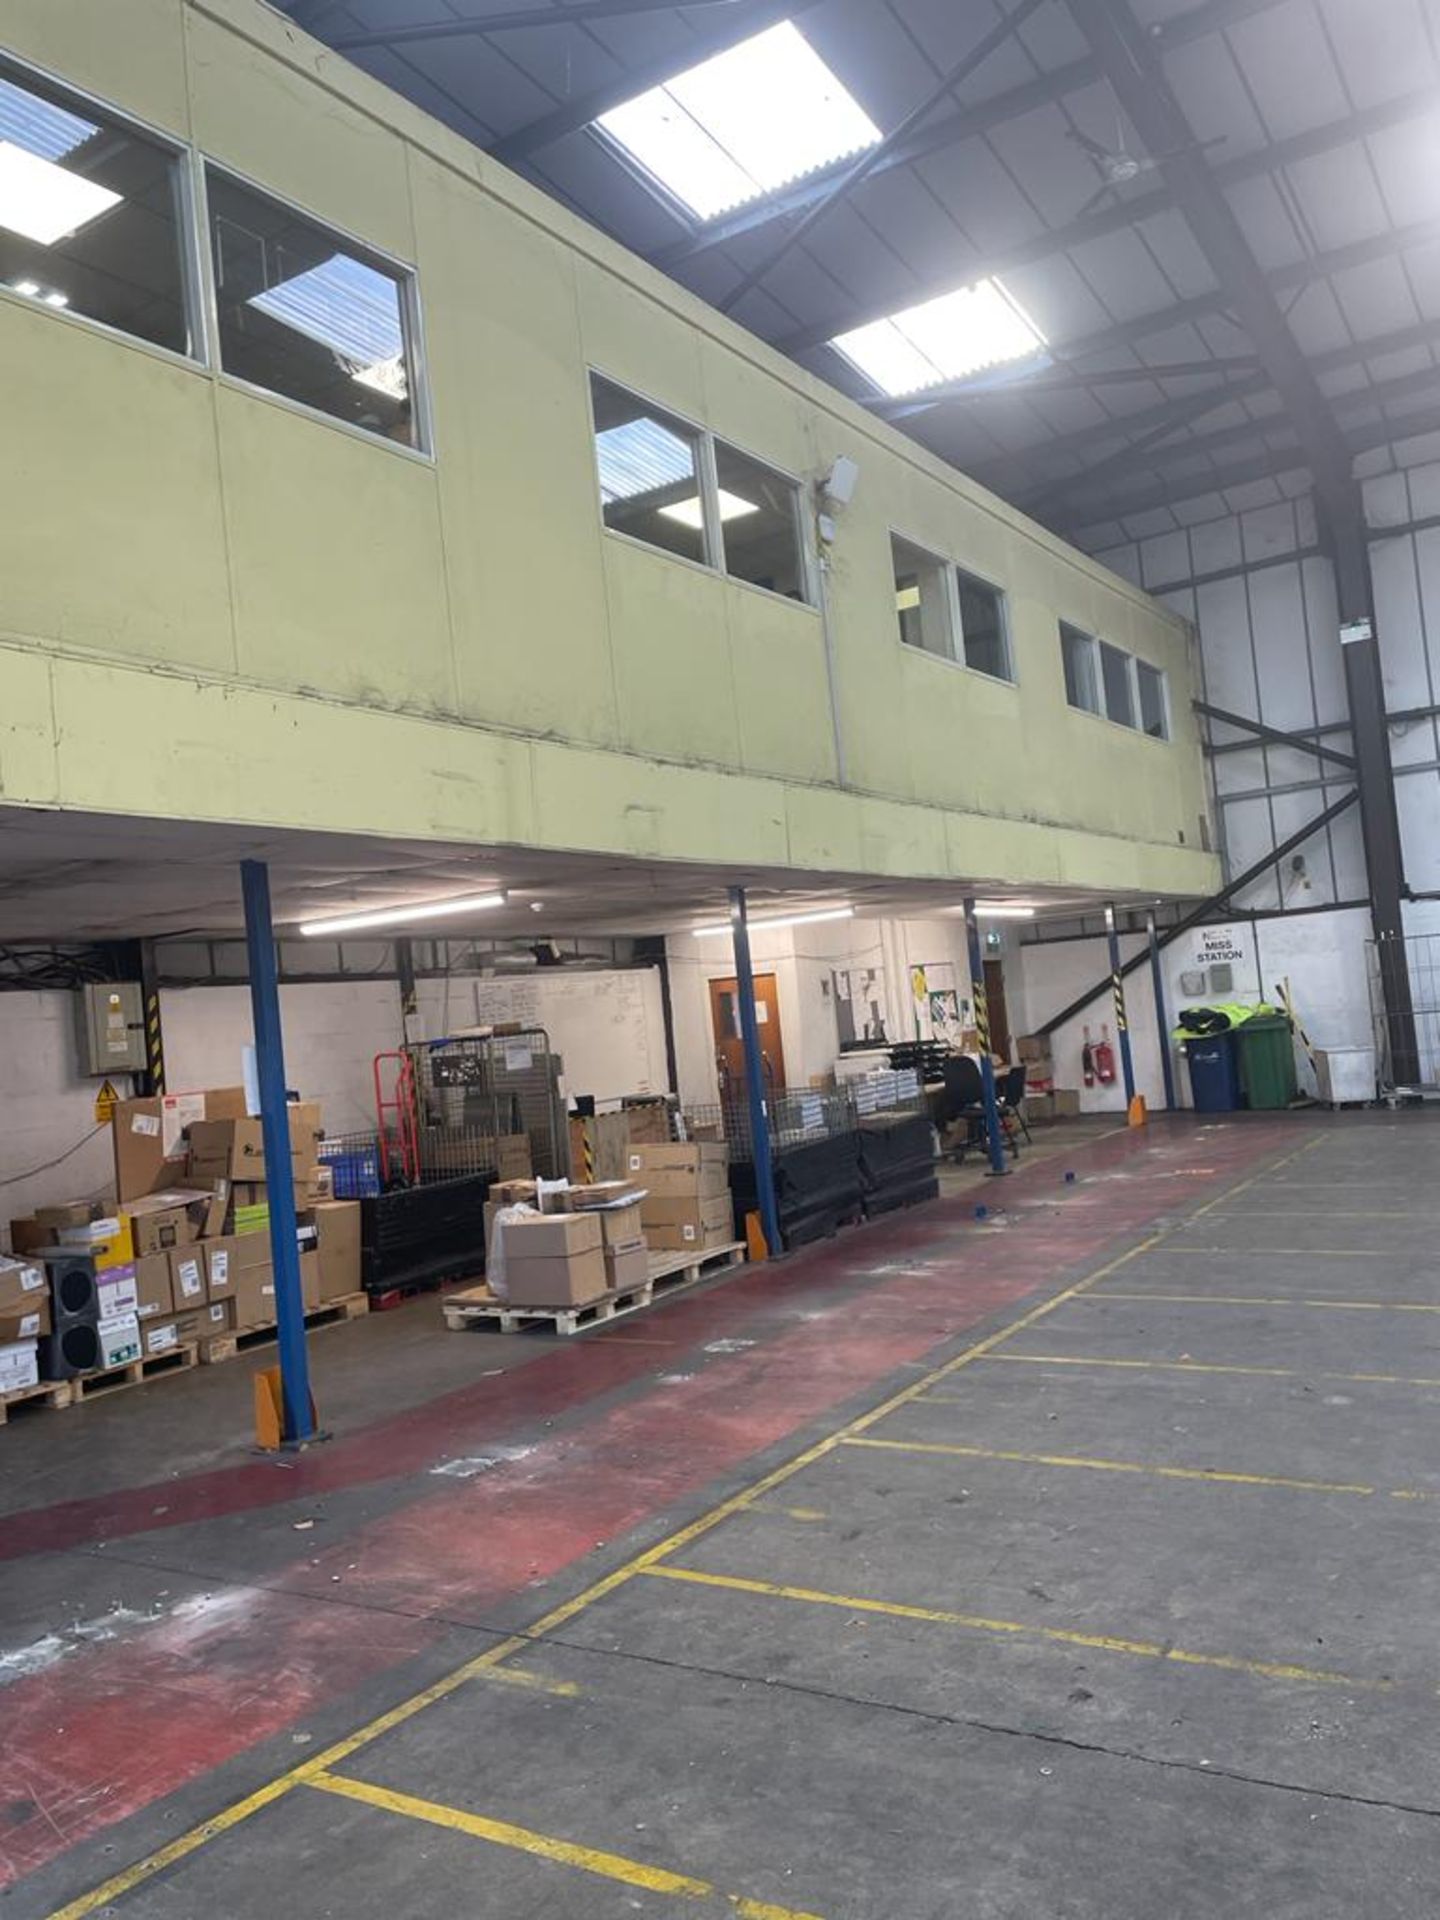 MEZZANINE FLOOR 20M LONG BY 4M WIDE BY 3M HIGH. DISMANTLED AND READY FOR COLLECTION.